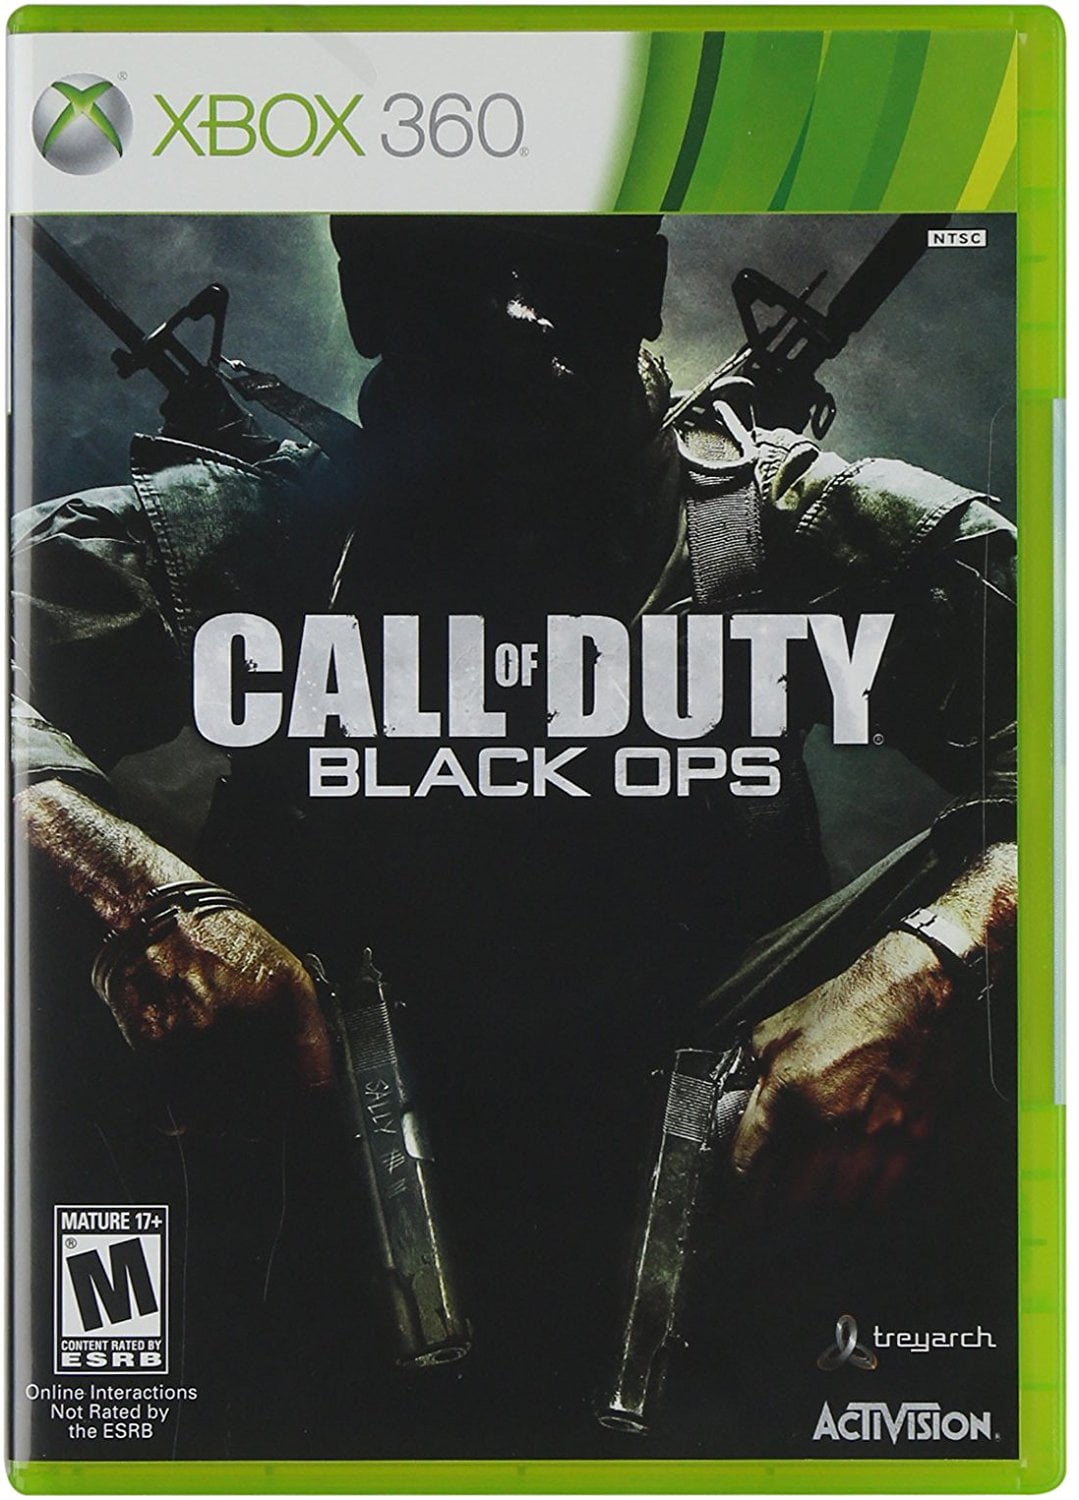 Call of Duty: Black Ops 3, Activision, Xbox 360, 047875874626